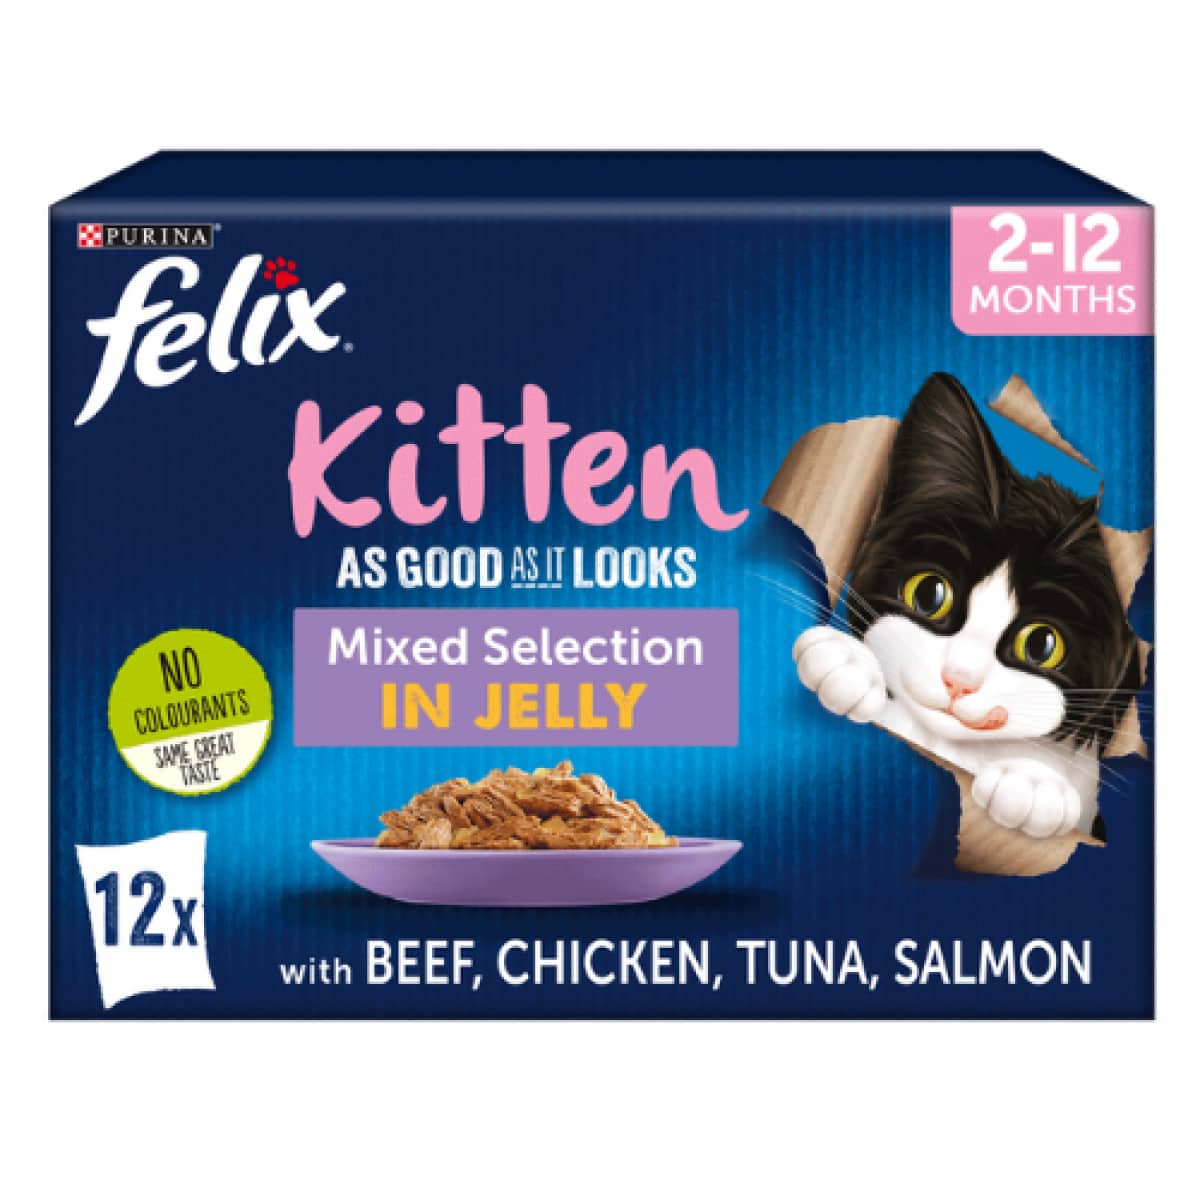 Felix As Good As it Looks Kitten - Mixed Selection in Jelly 12 x 100g Main Image